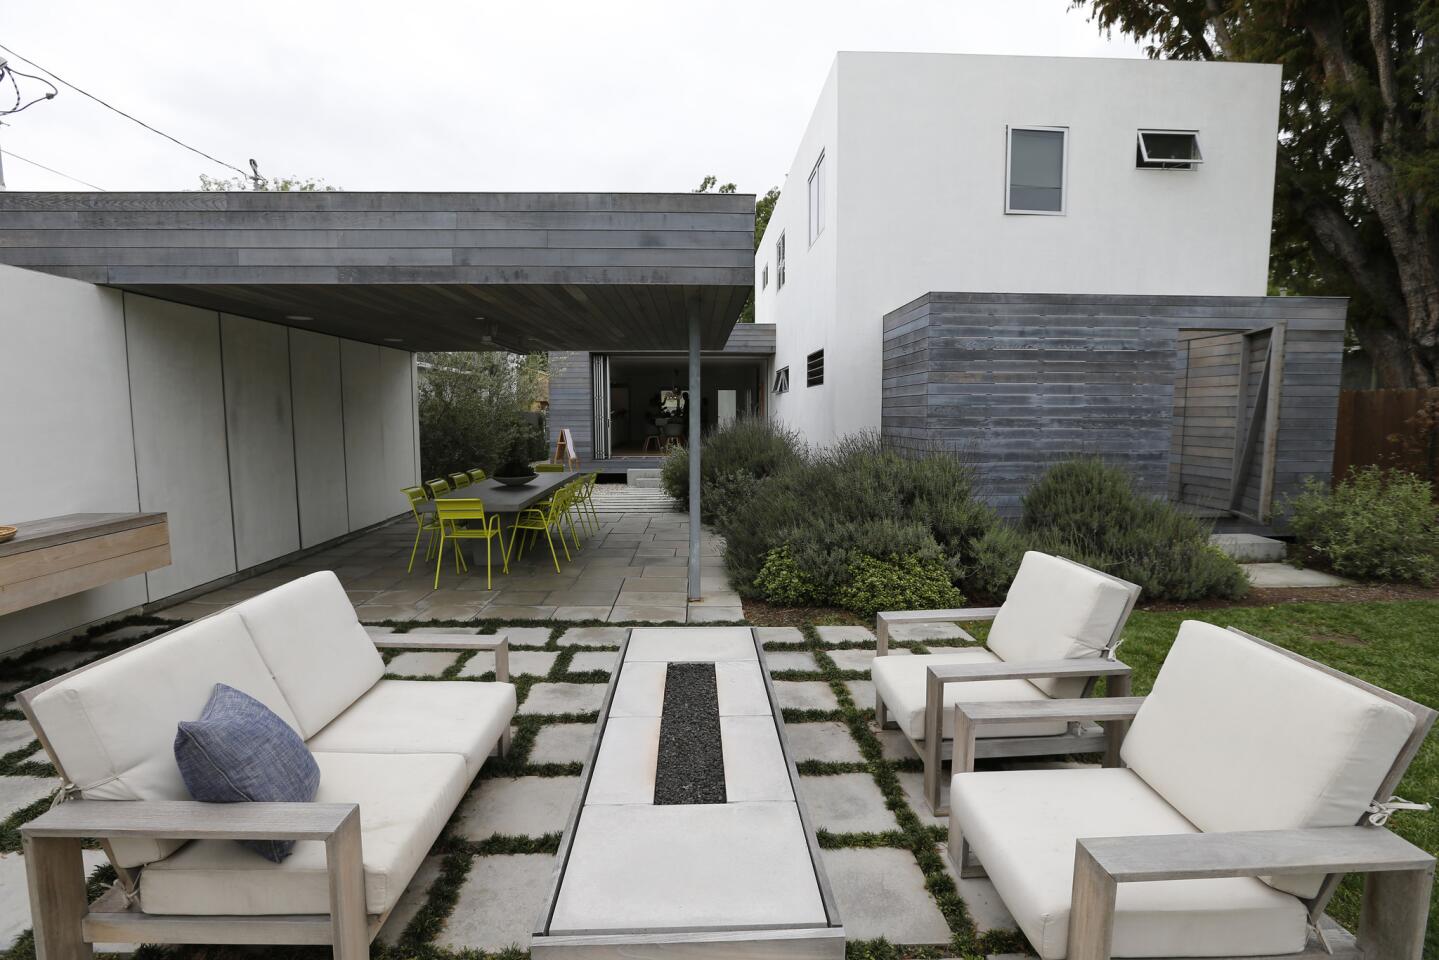 Culver City home creates community both indoors and out